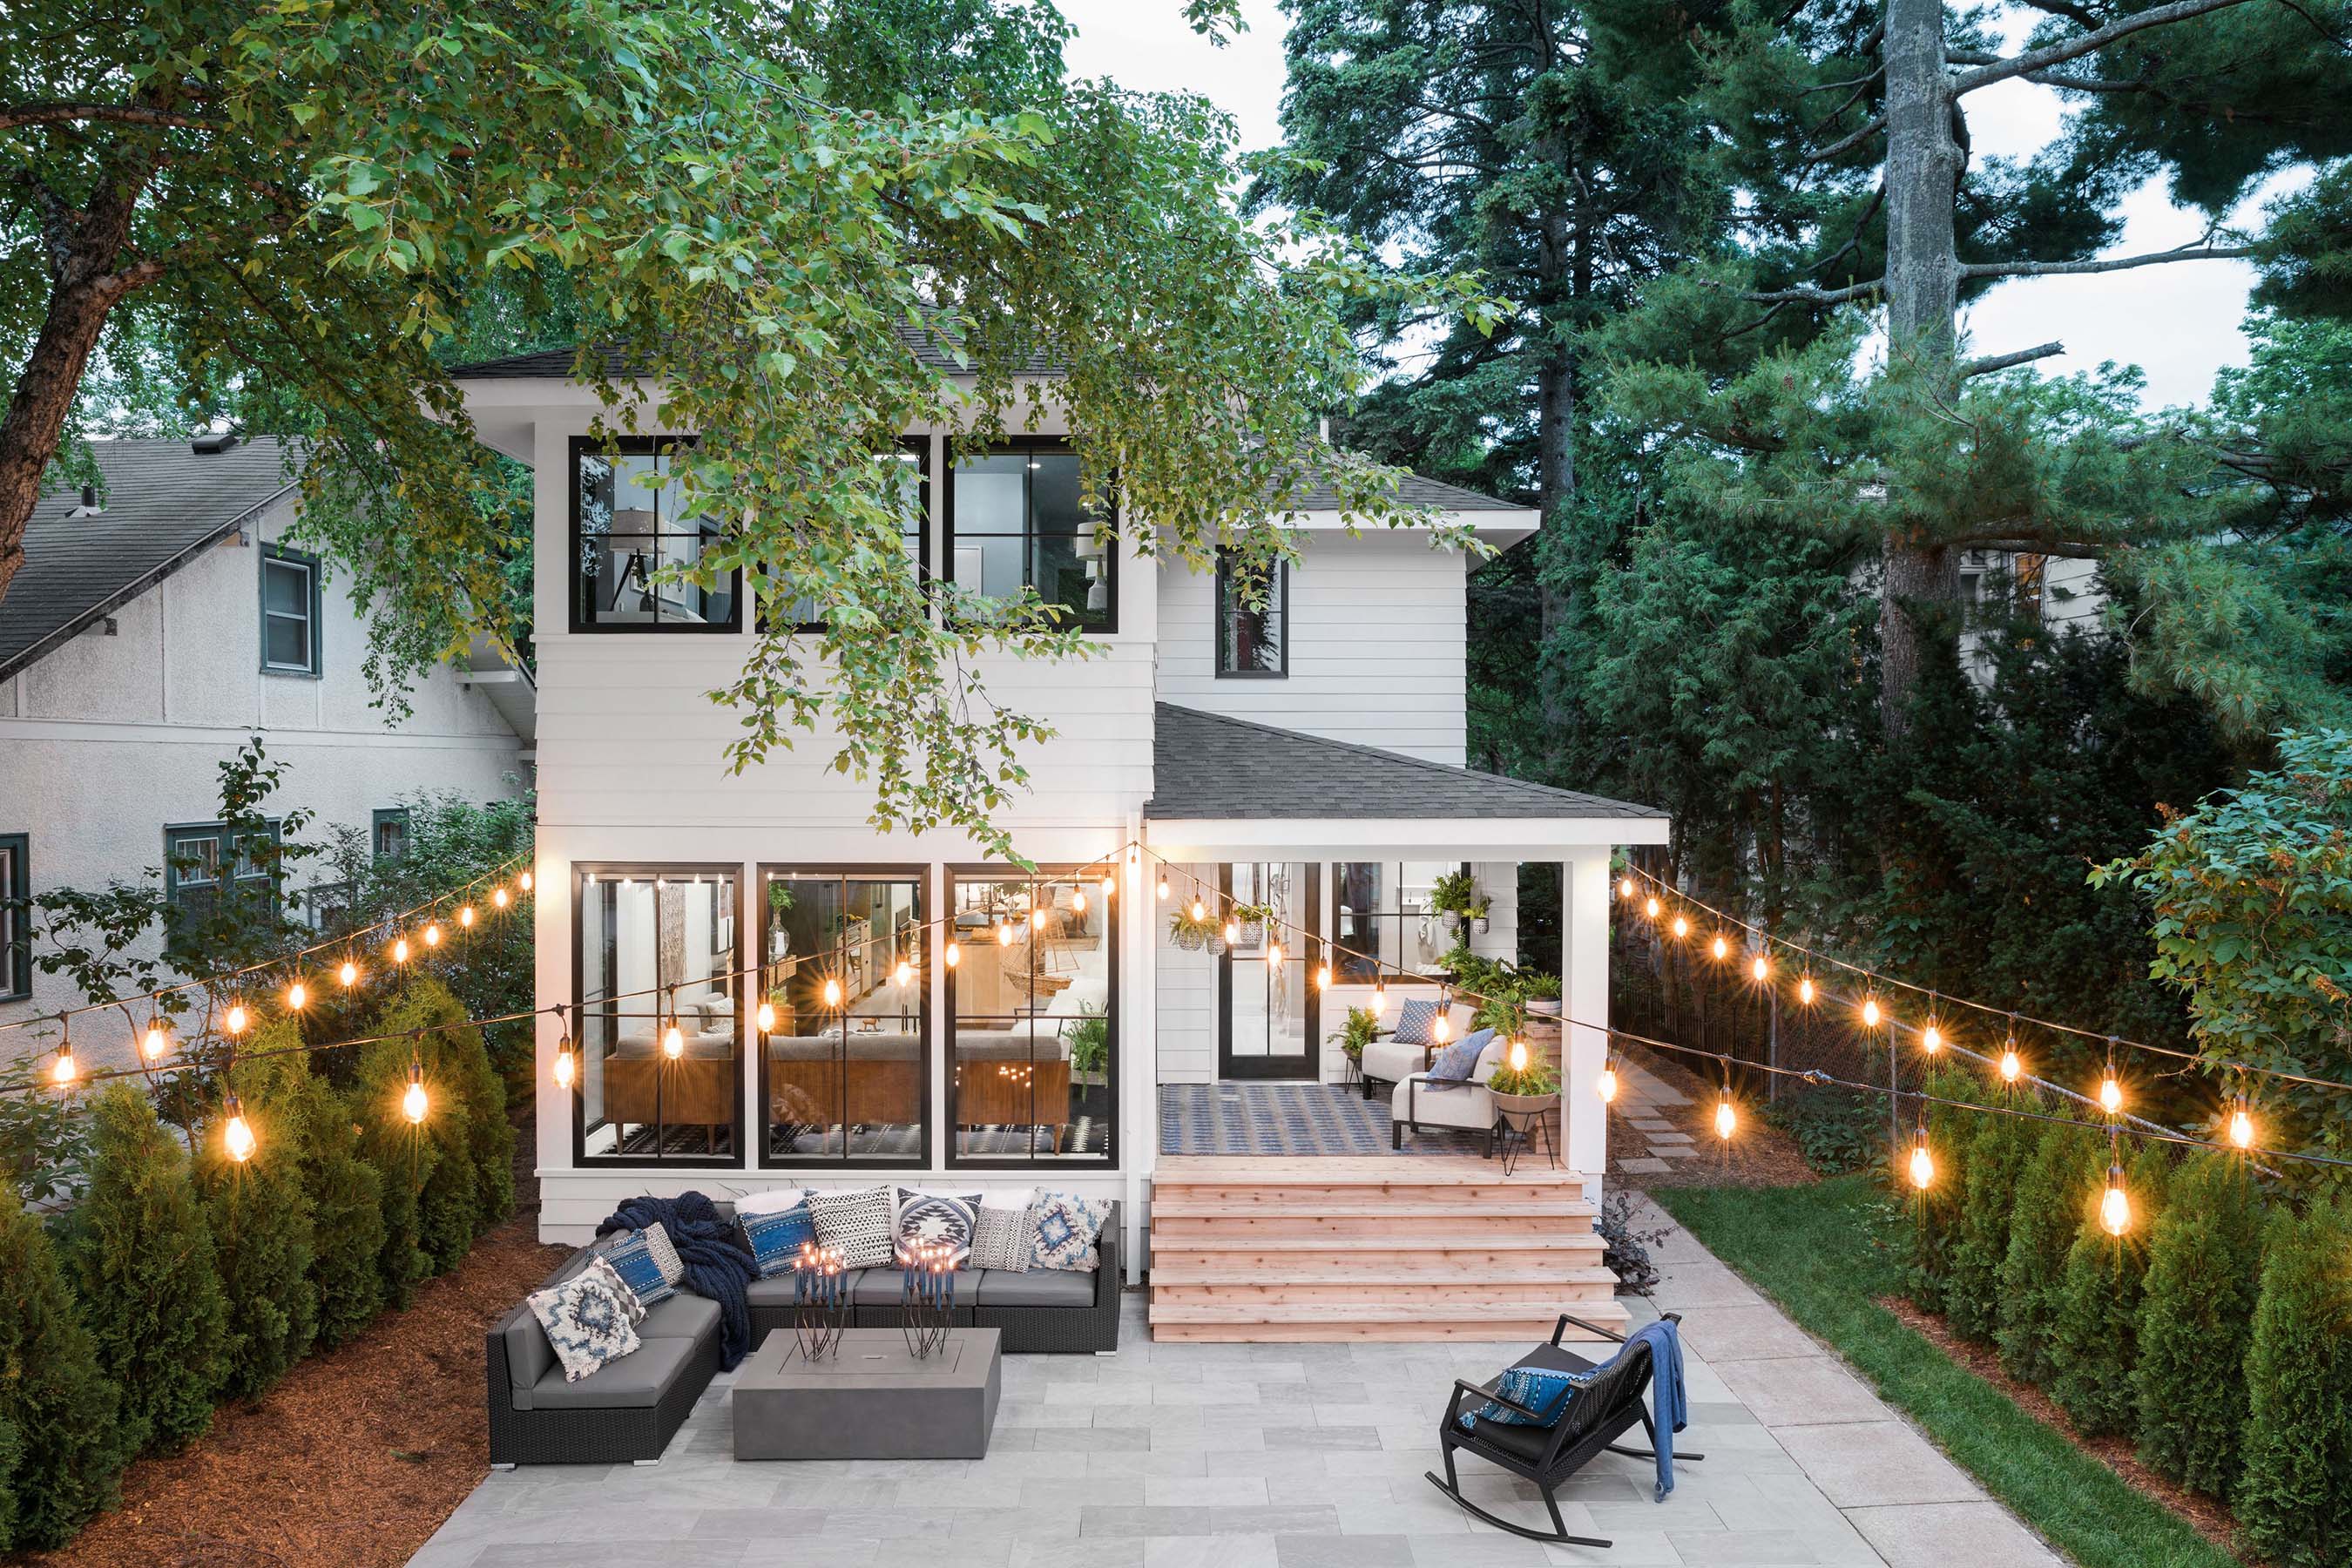 Oozing with midwestern hospitality, the backyard of the HGTV Urban Oasis 2019 is perfect for both relaxing and entertaining. The detached garage has been painted to add a backdrop reminiscent of Nordic fjords, while café lights add instant ambience.